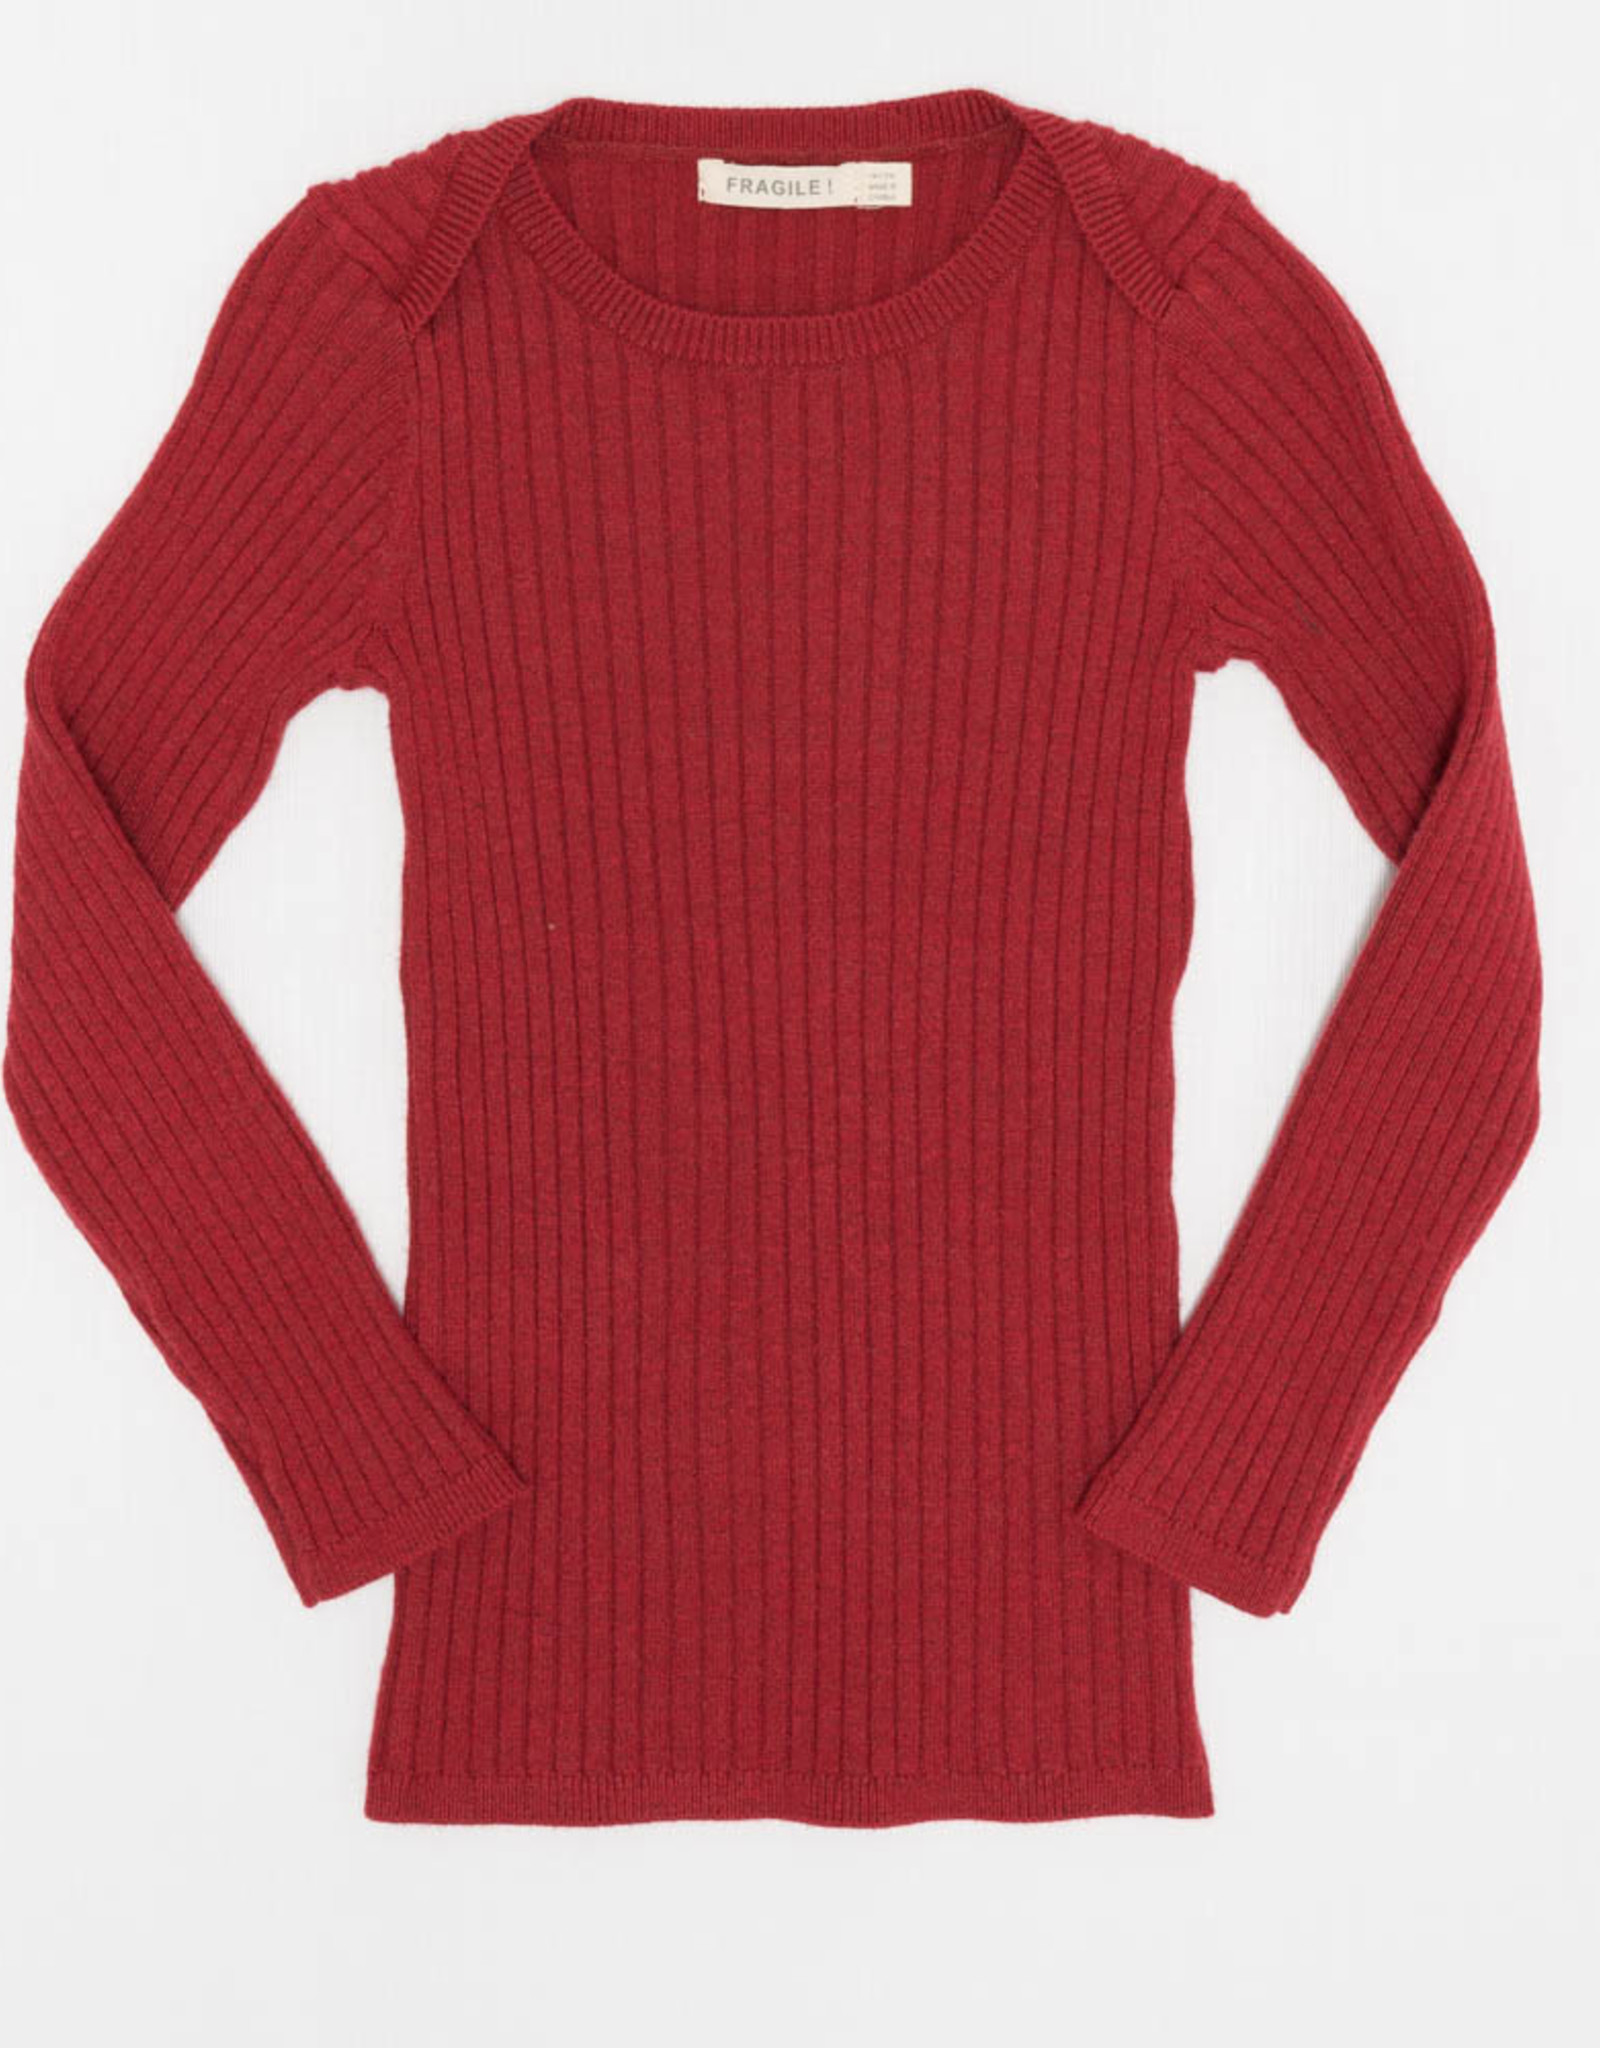 FRAGILE Fragile Ribbed Sweater Top